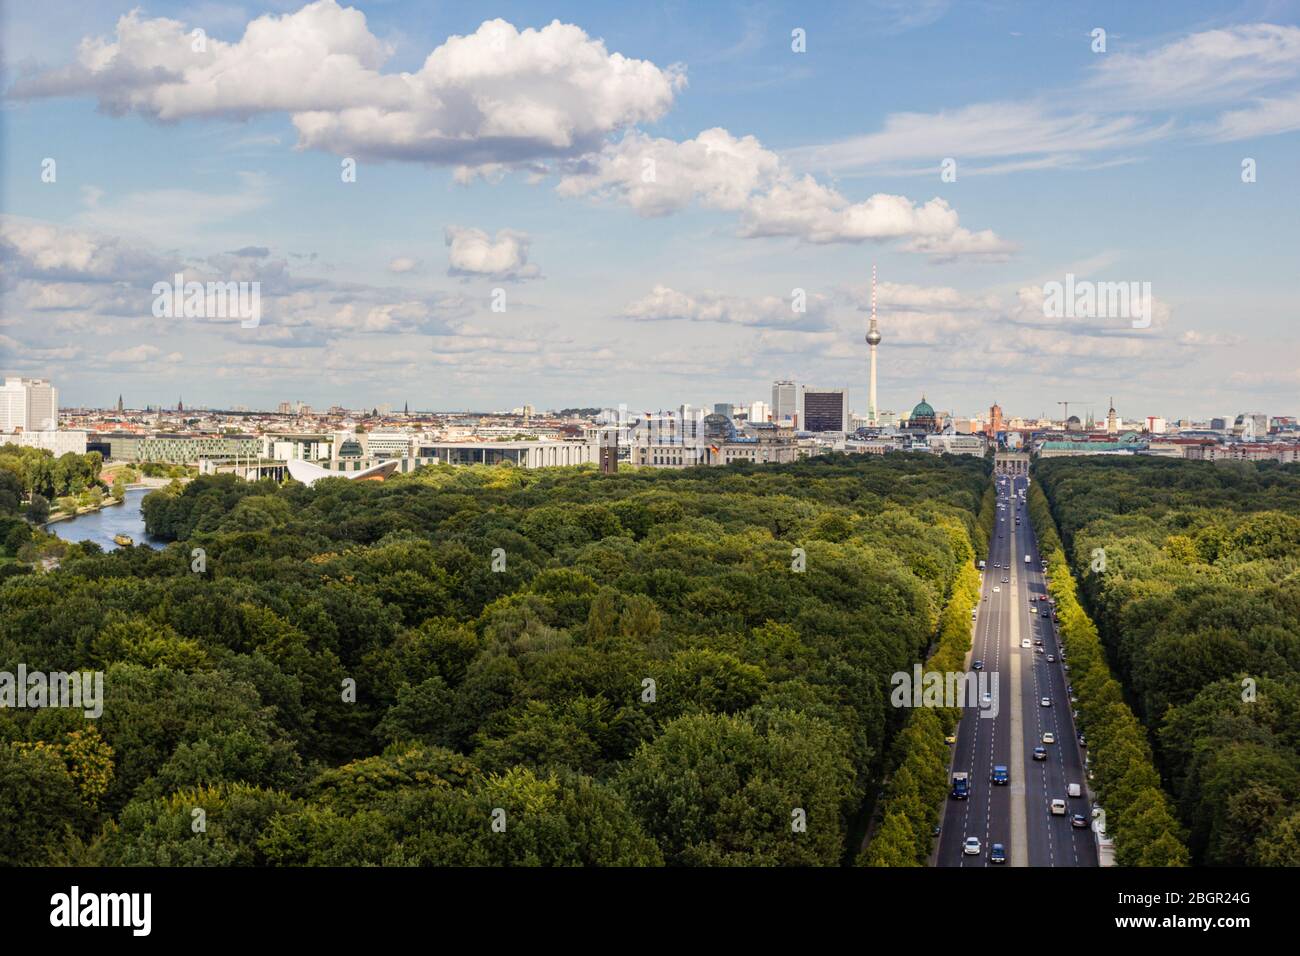 Cityscape of Berlin and road in Tiergarten park landscape in cloudy day Stock Photo